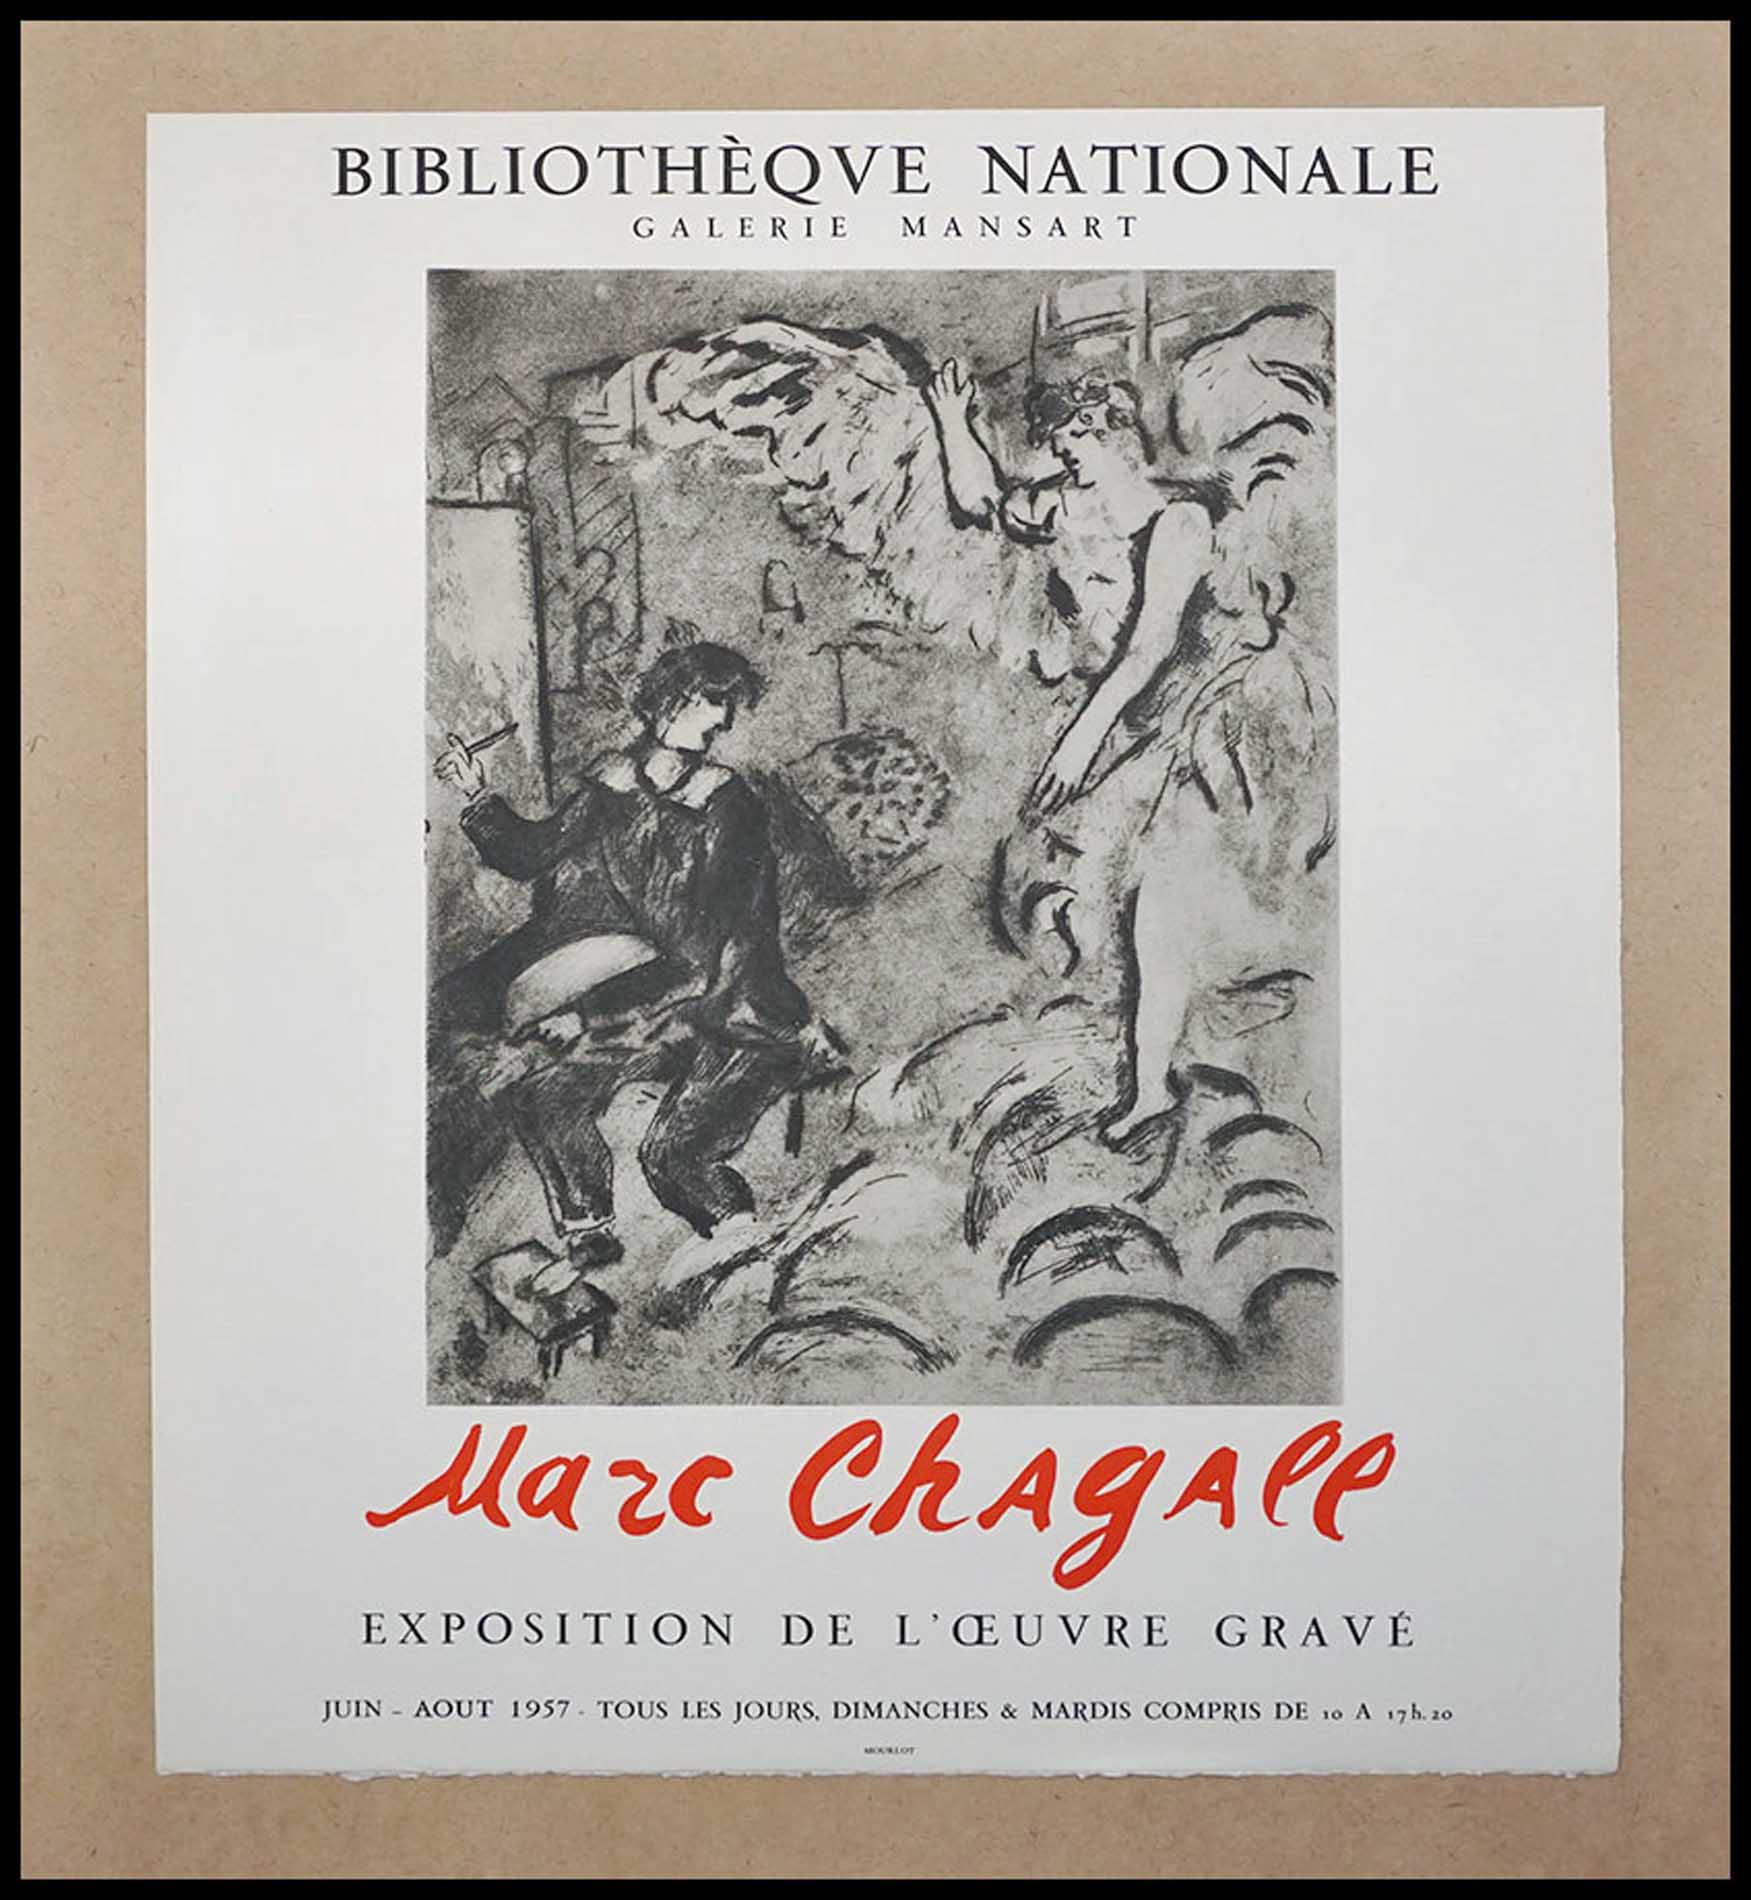 Marc Chagall, Bibliotheque Nationale